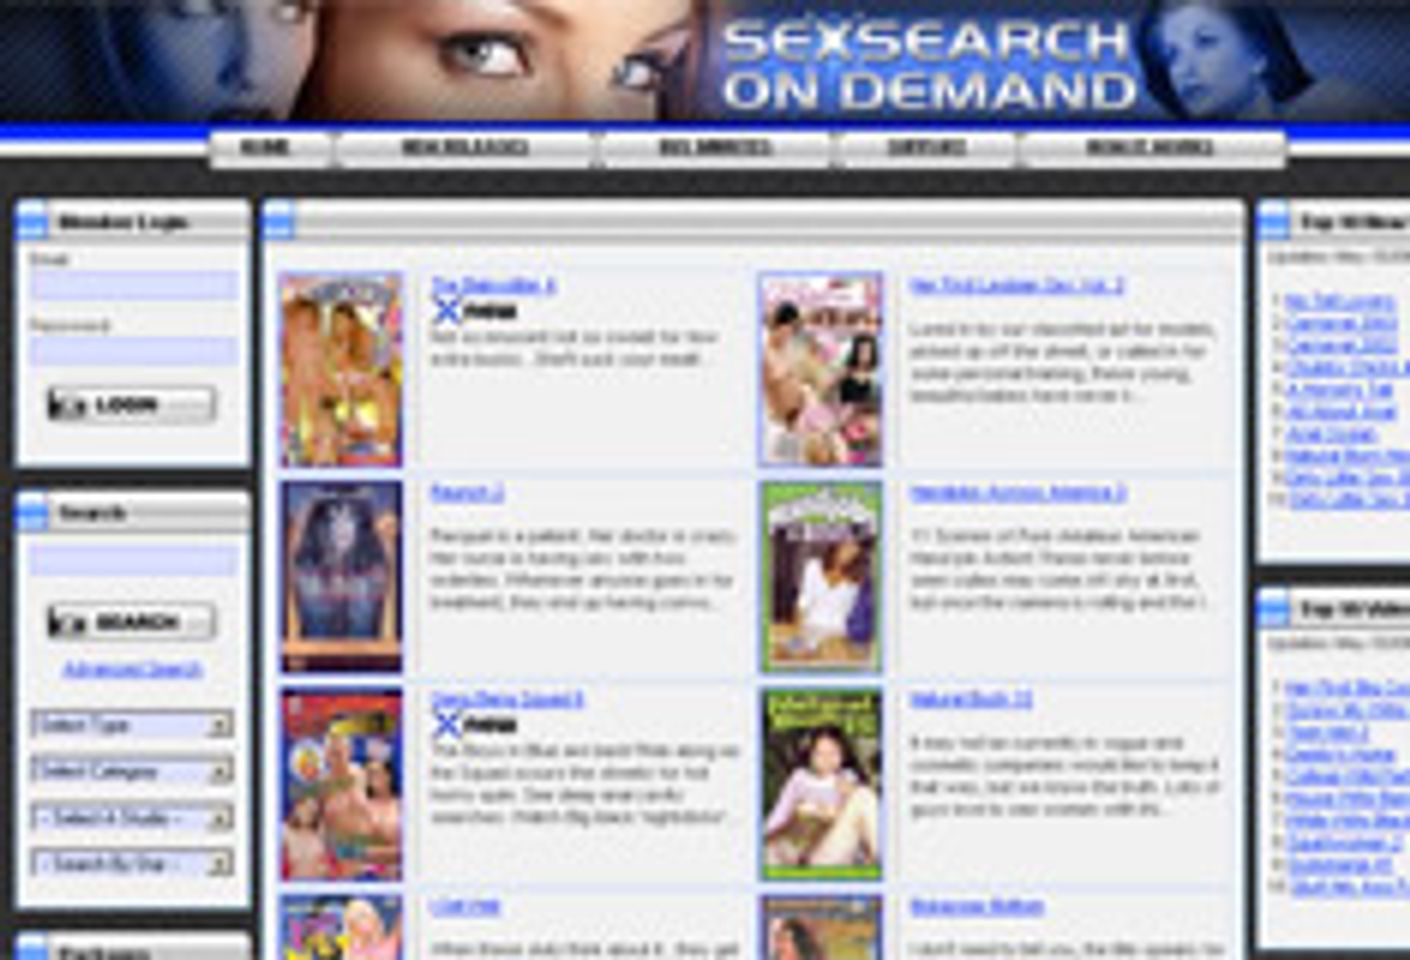 Adult Rental, SexSearch Join Forces for SexSearchOnDemand